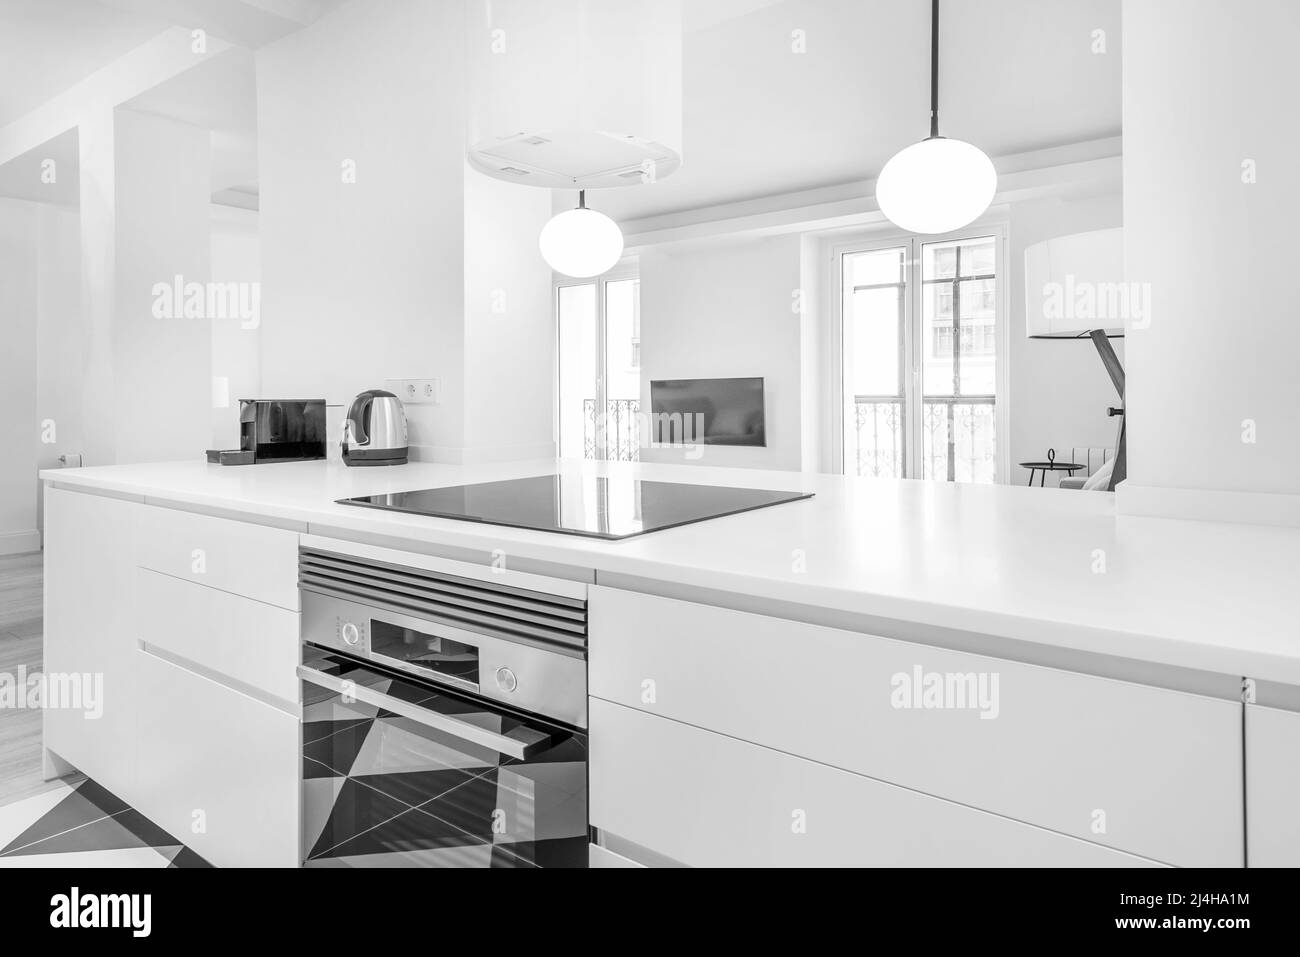 Kitchen with white stone design countertops with dominant white lines and lamps with white spherical lampshades Stock Photo